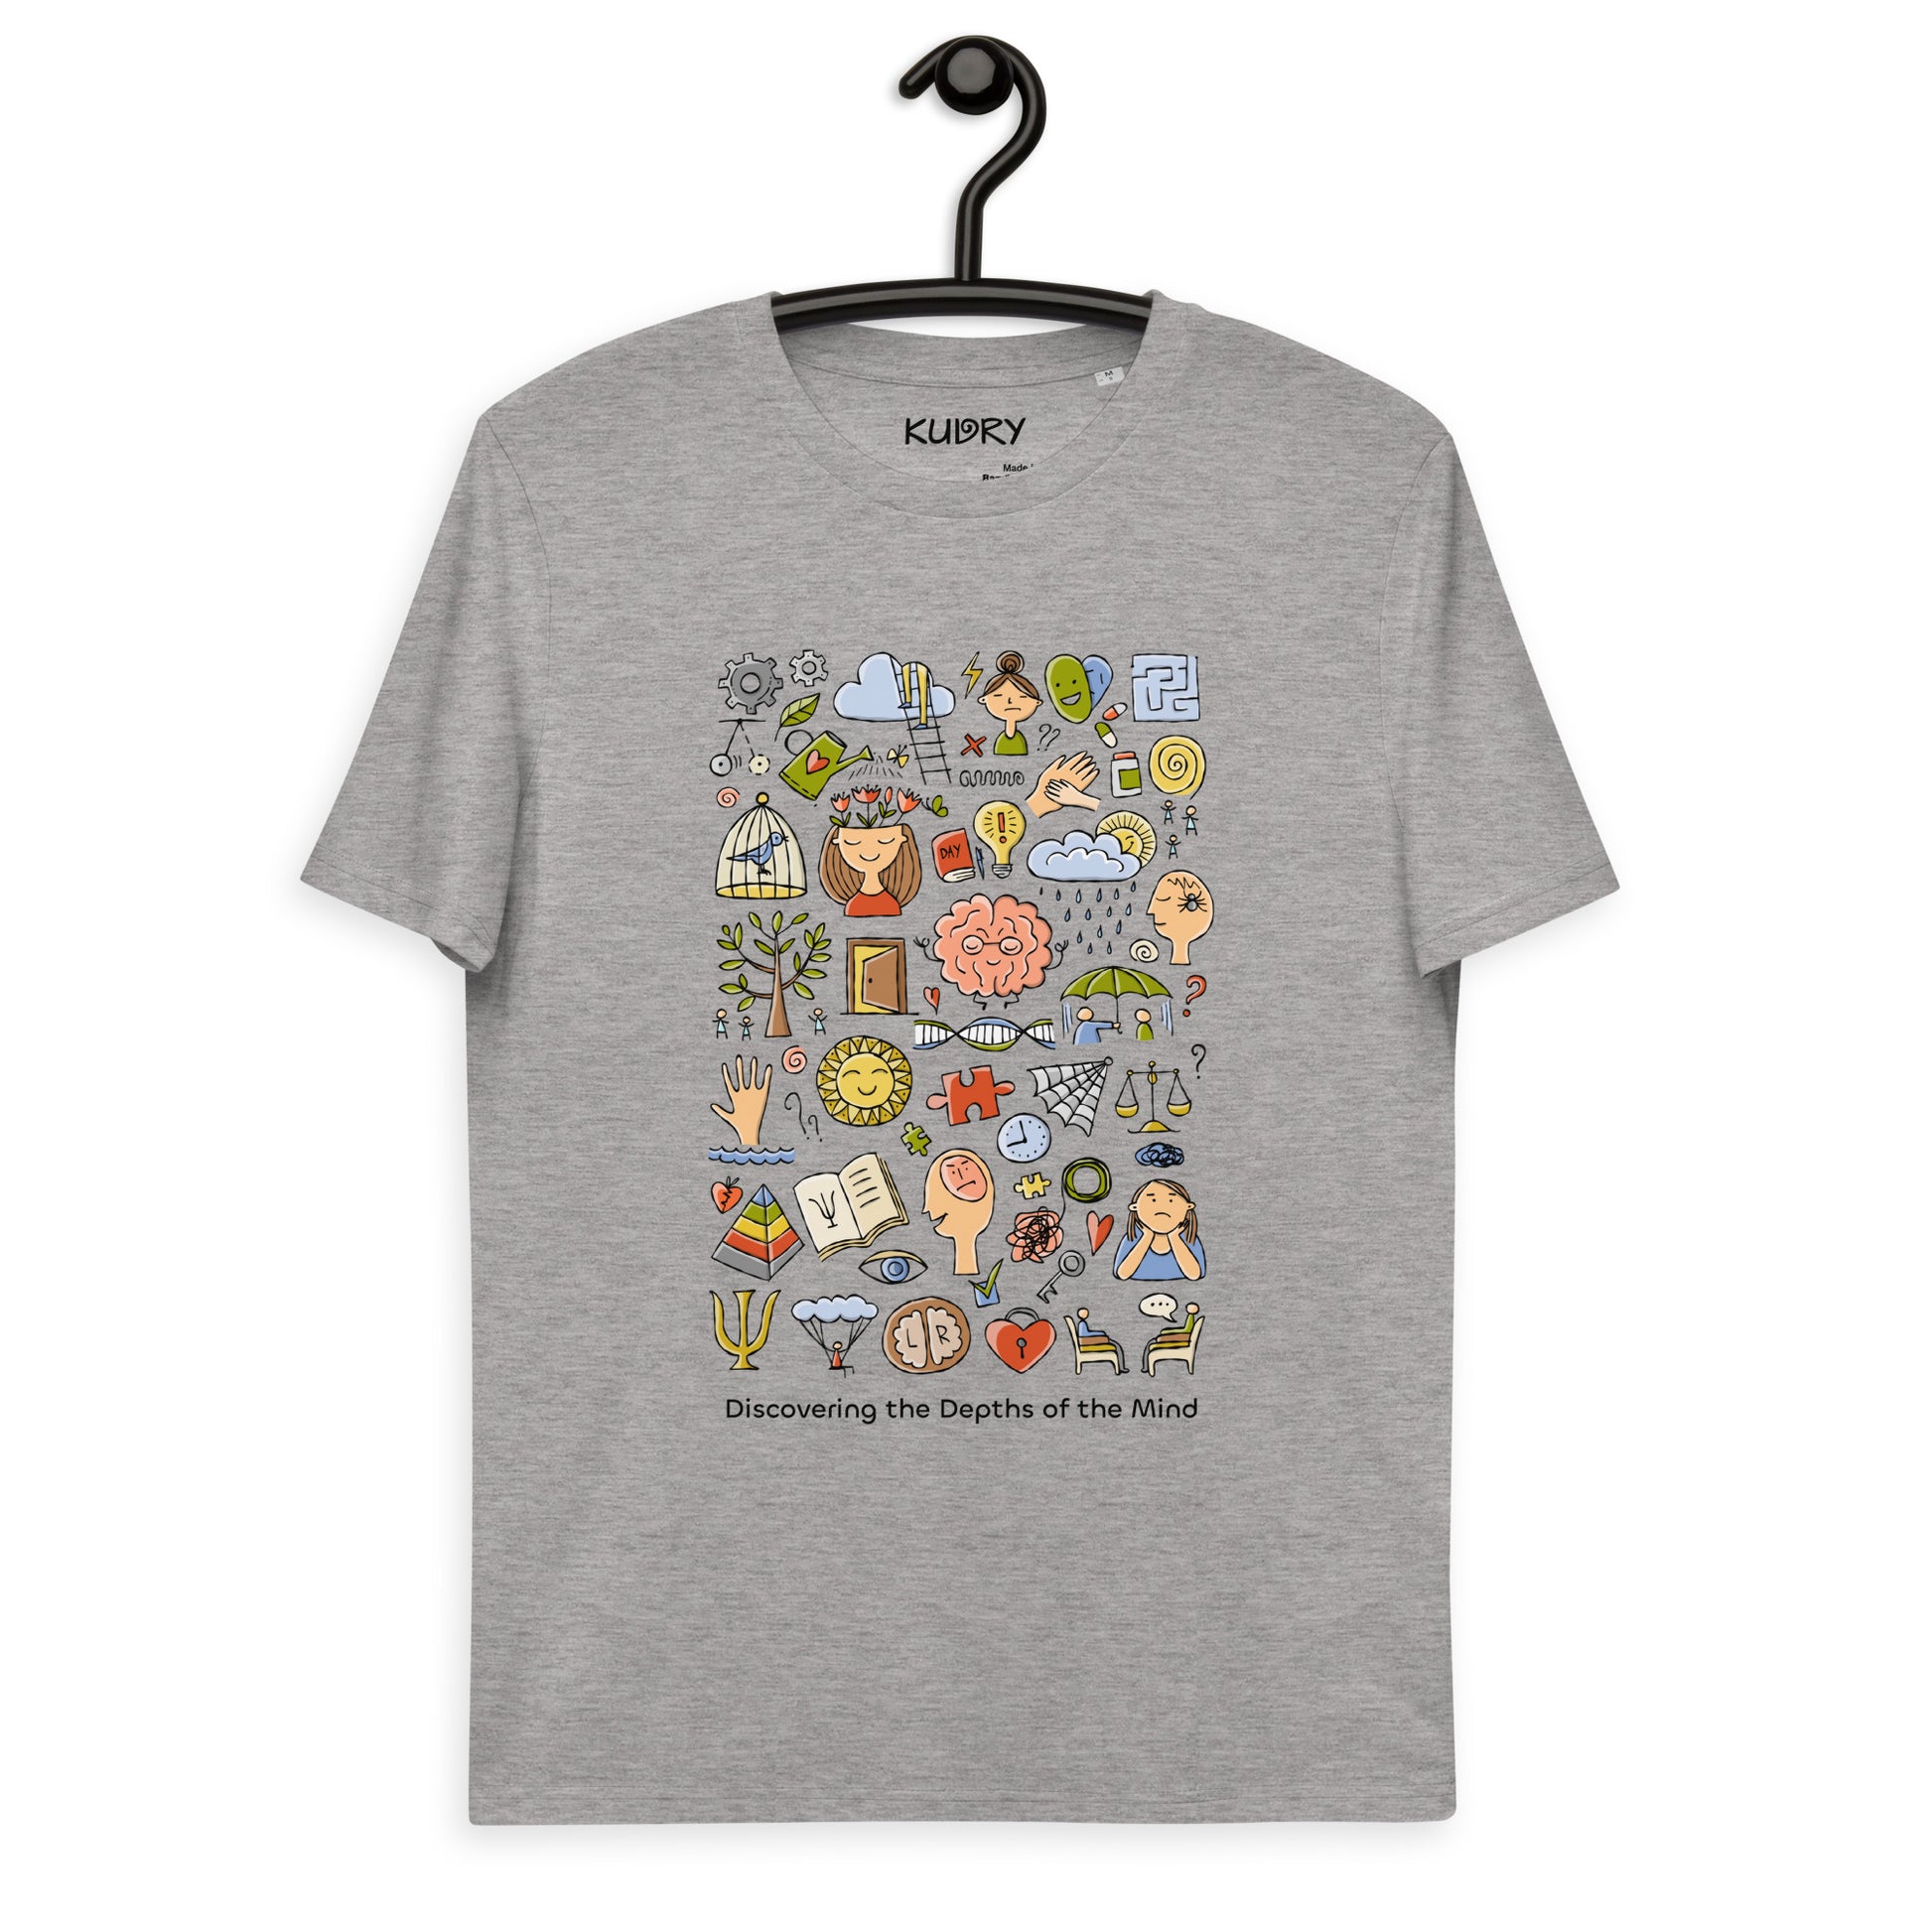 Grey t-shirt with funny concept art print about Psychology. Discovering the Depths of the Mind